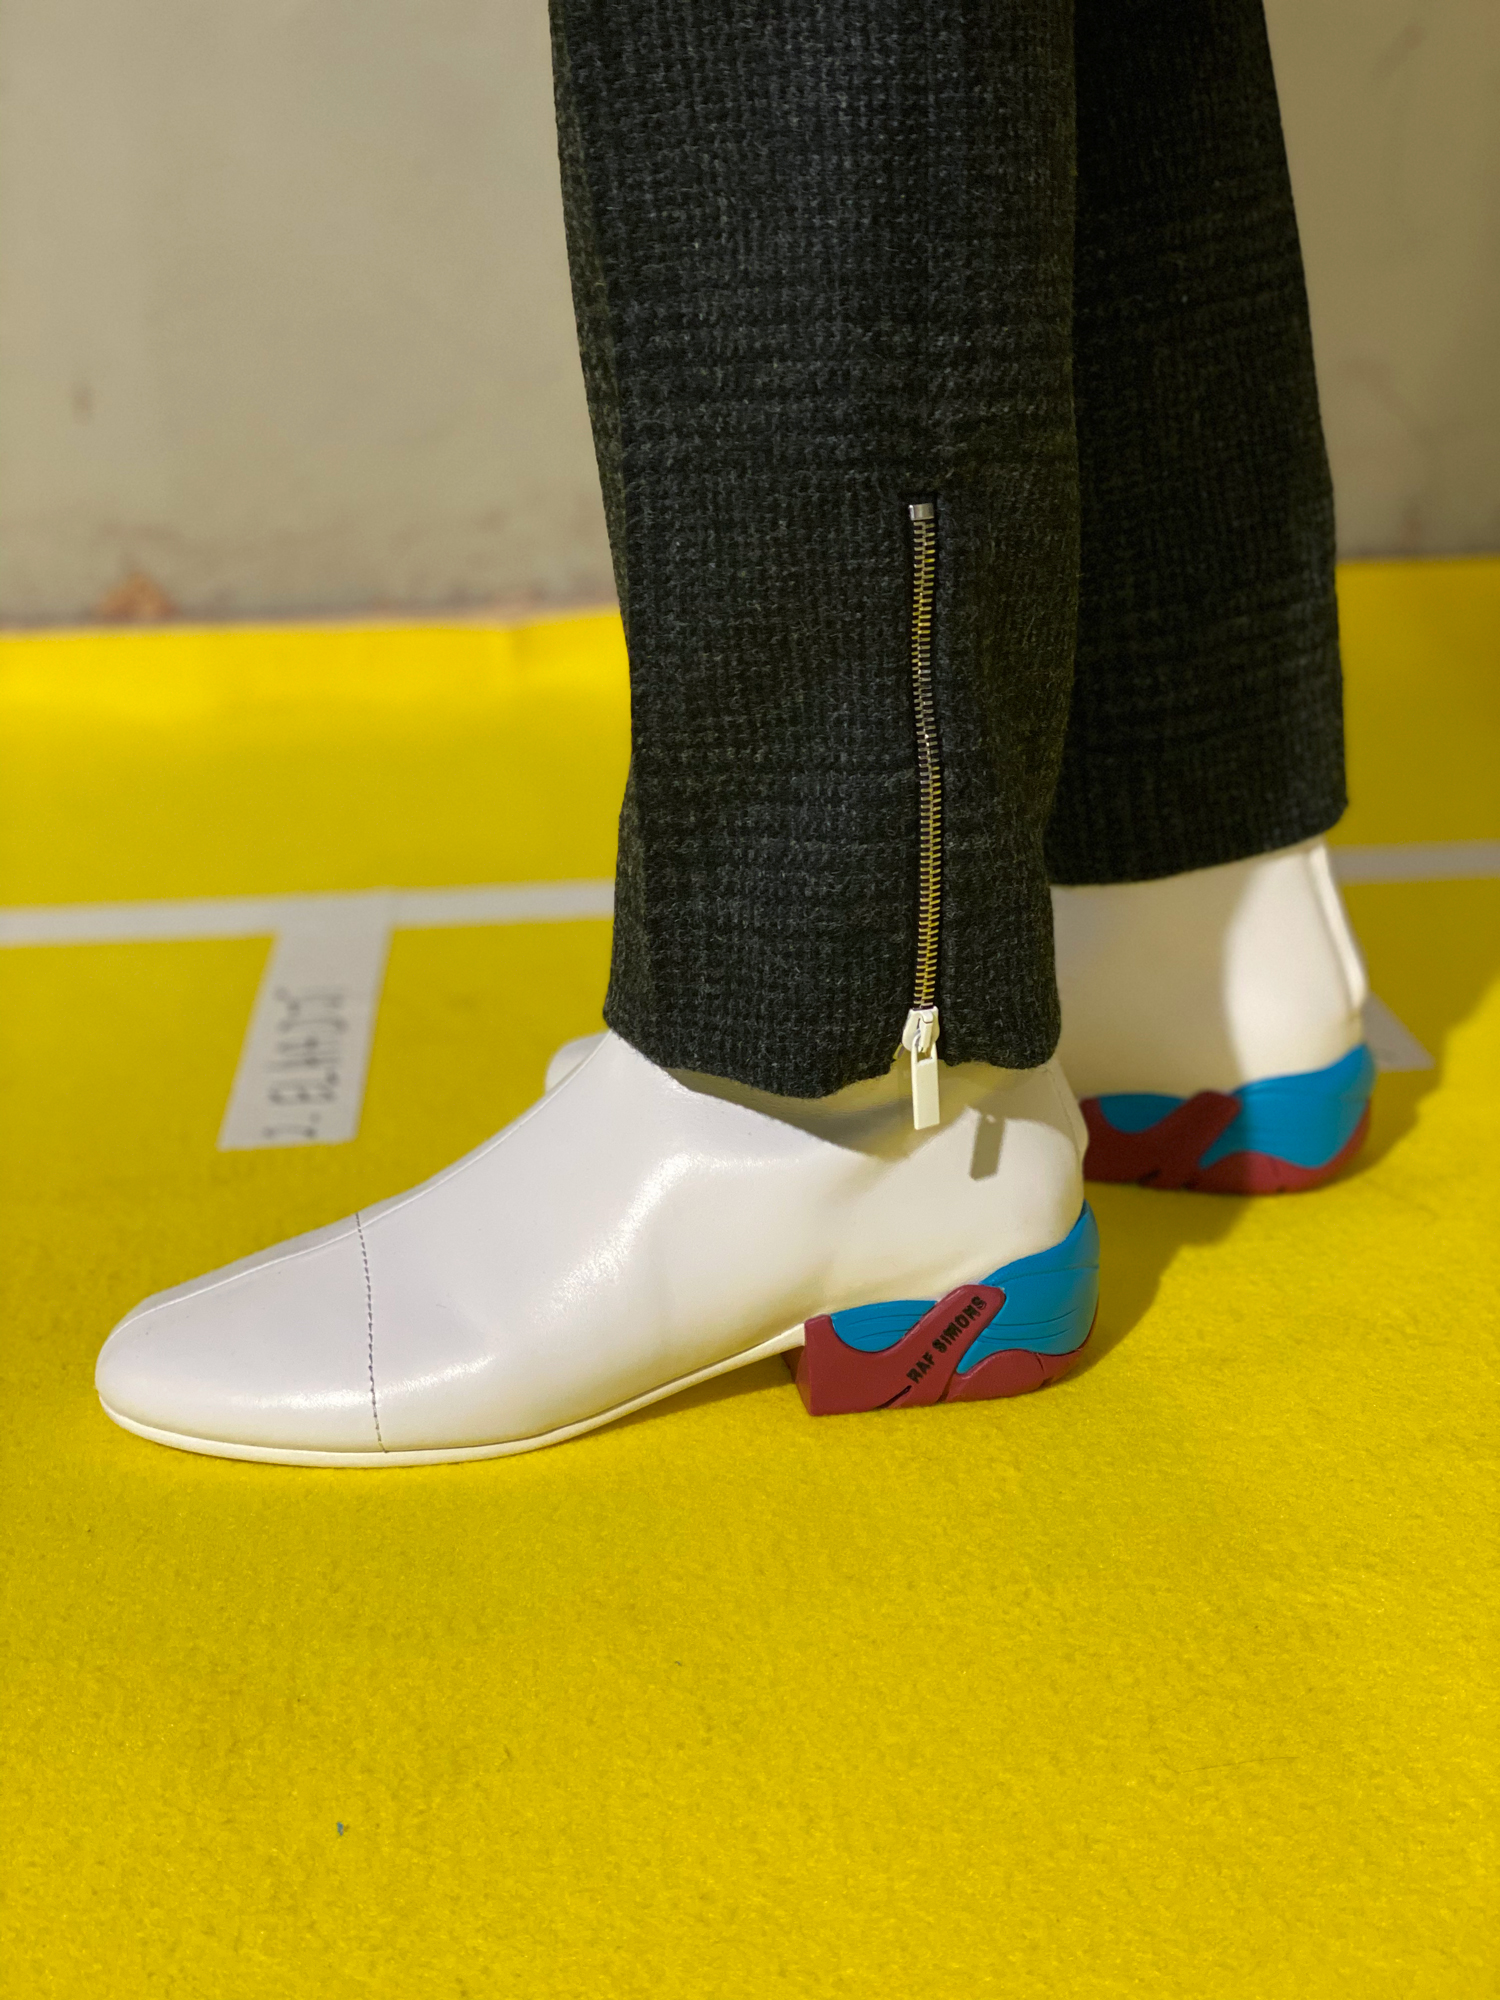 Raf Simons' New (Runner) Kicks are Actually Chelsea Boots